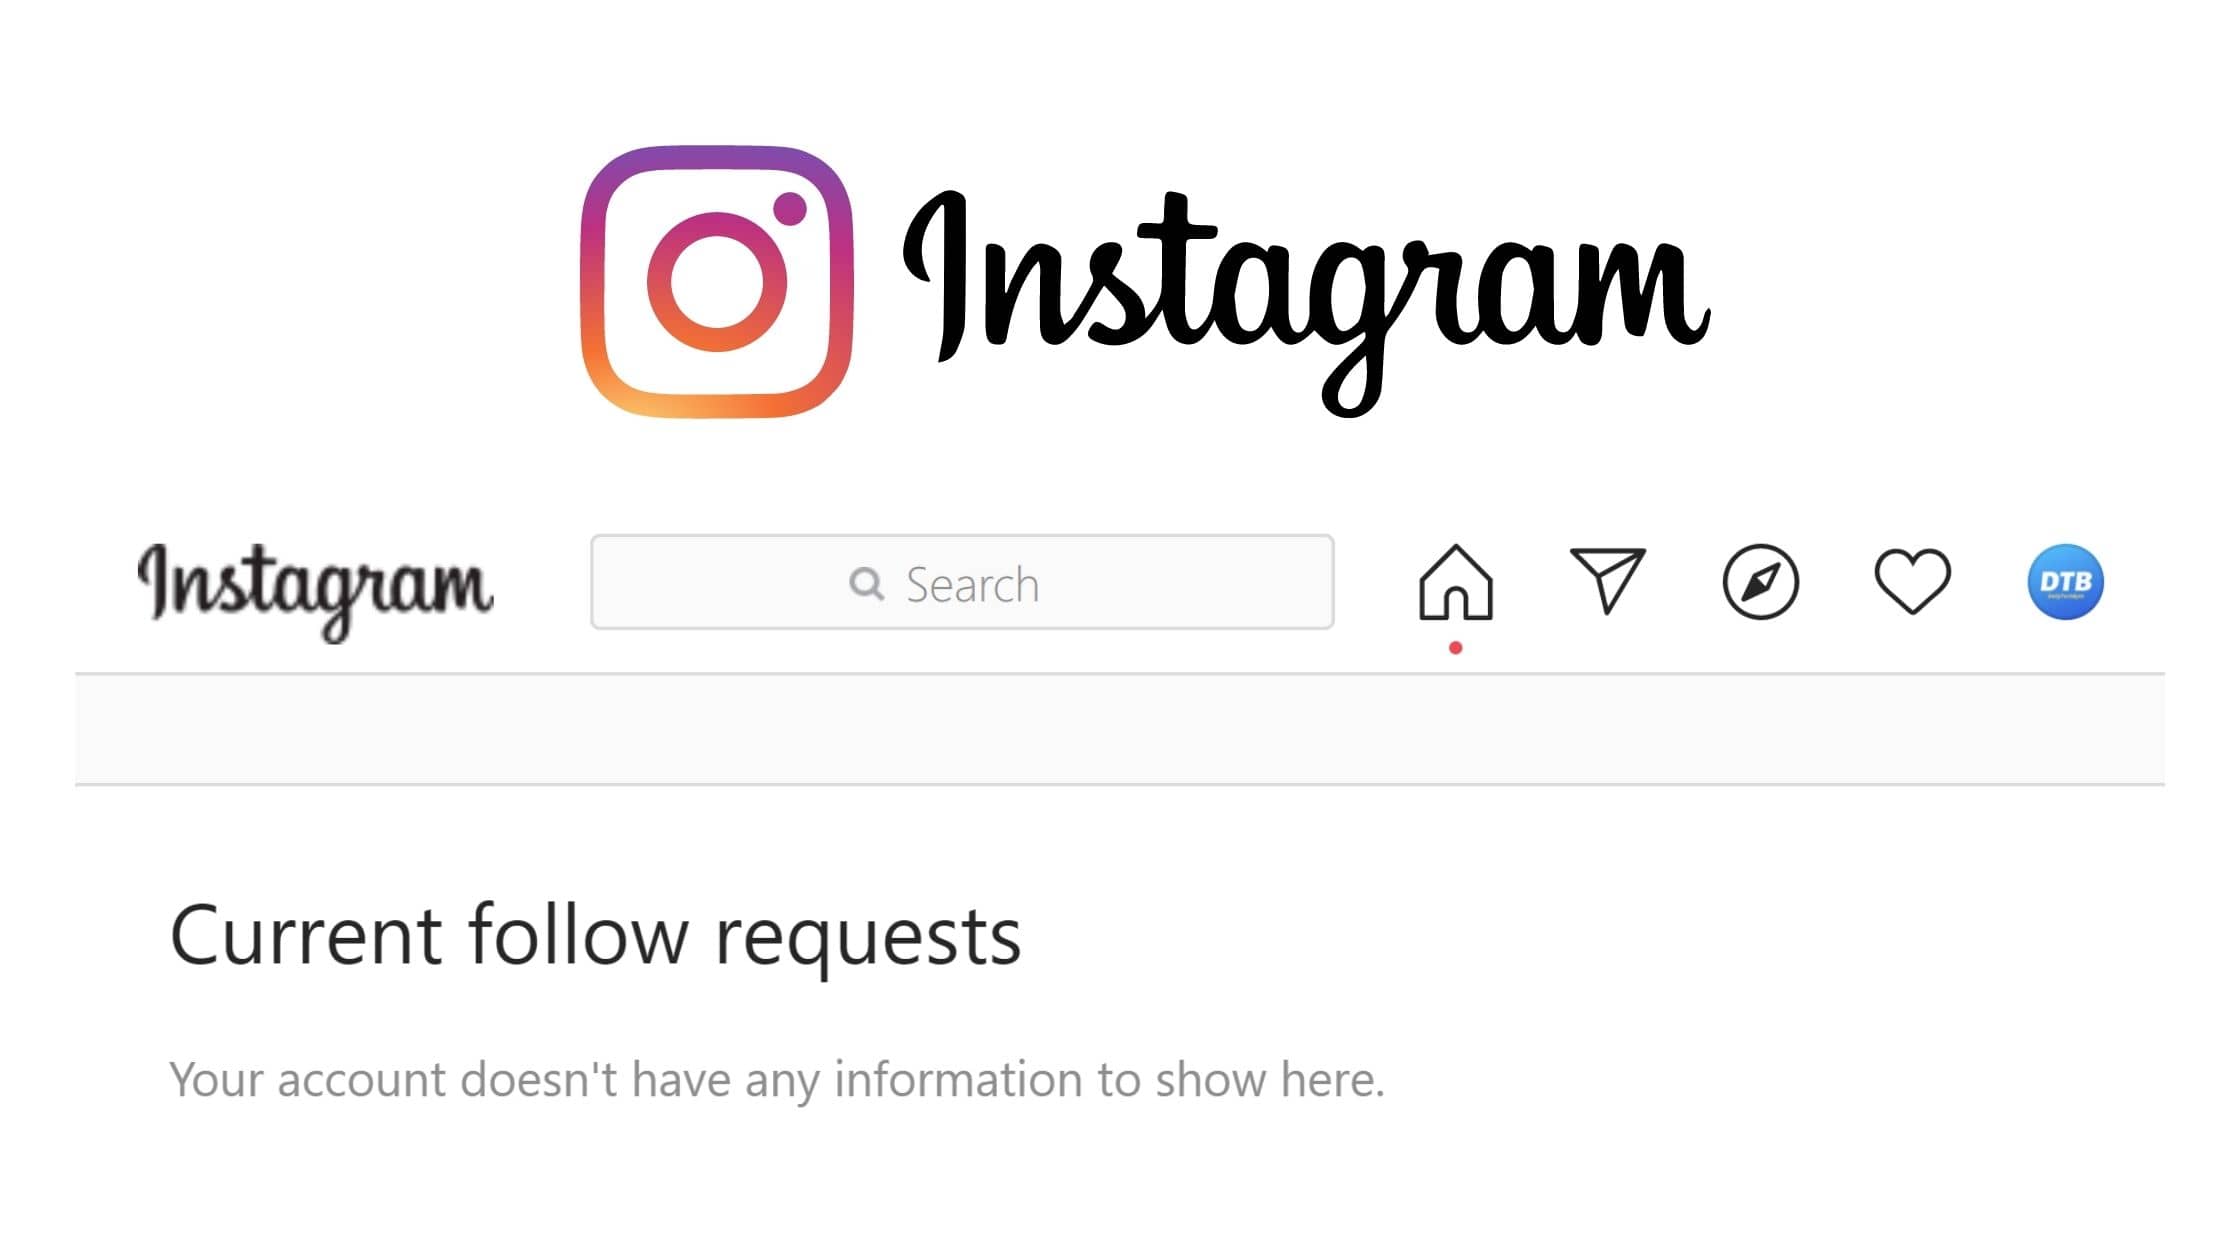 How to See List of All Accounts You Have Requested on Instagram